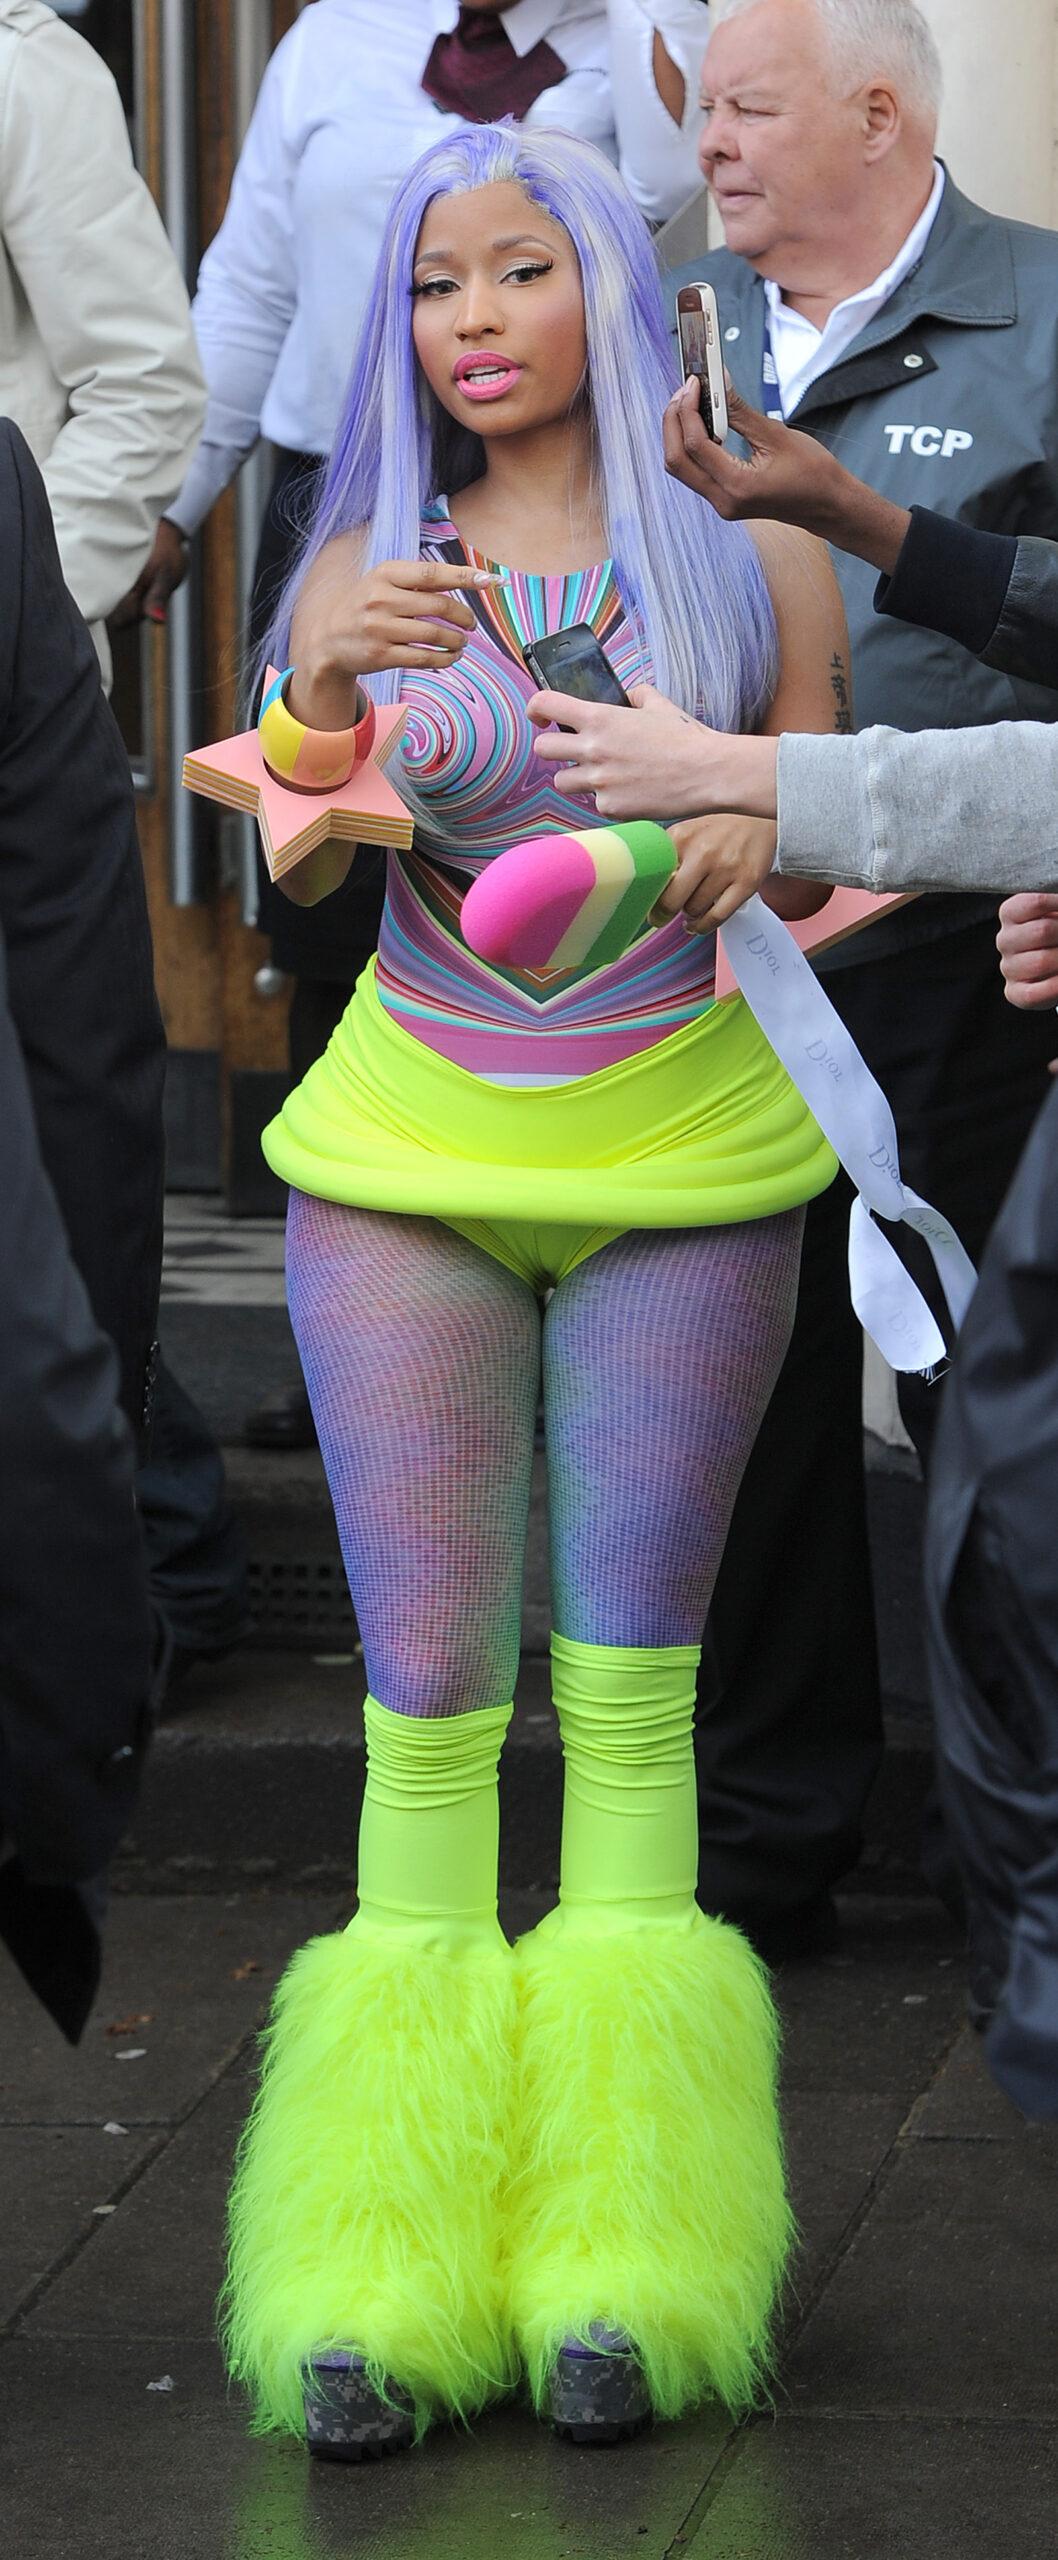 Nicki Minaj leaving the BBC Maida Vale studios The singer showed off her new blue hair and wore a multicoloured top neon yellow hot pants tights and neon yellow boots